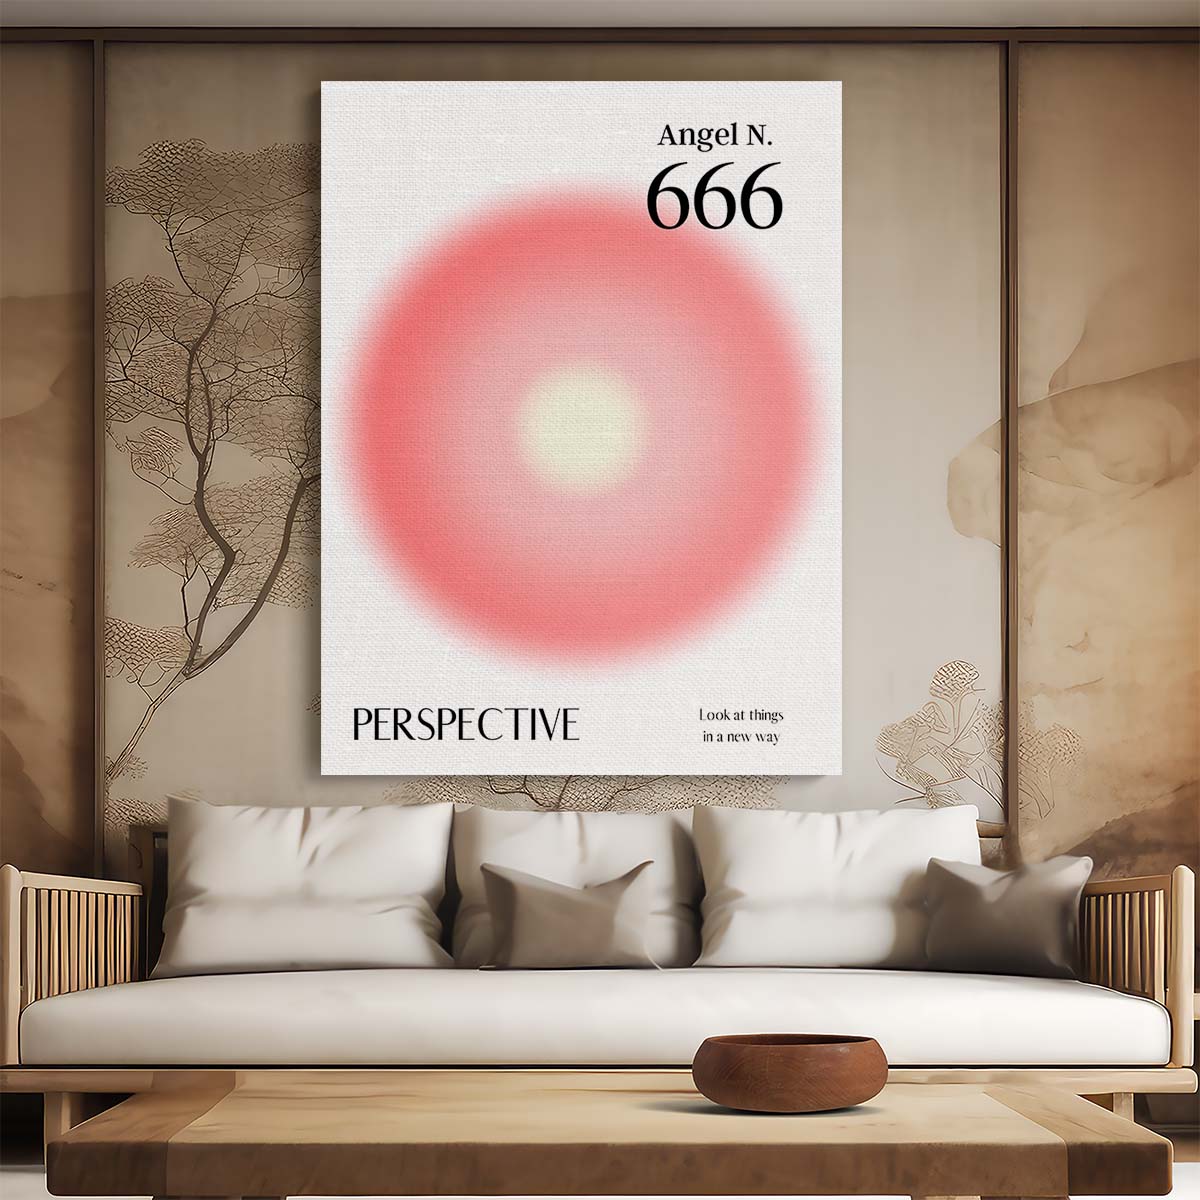 Colorful Angel Number 666 Illustration Positive Energy Manifestation Wall Art by Luxuriance Designs, made in USA